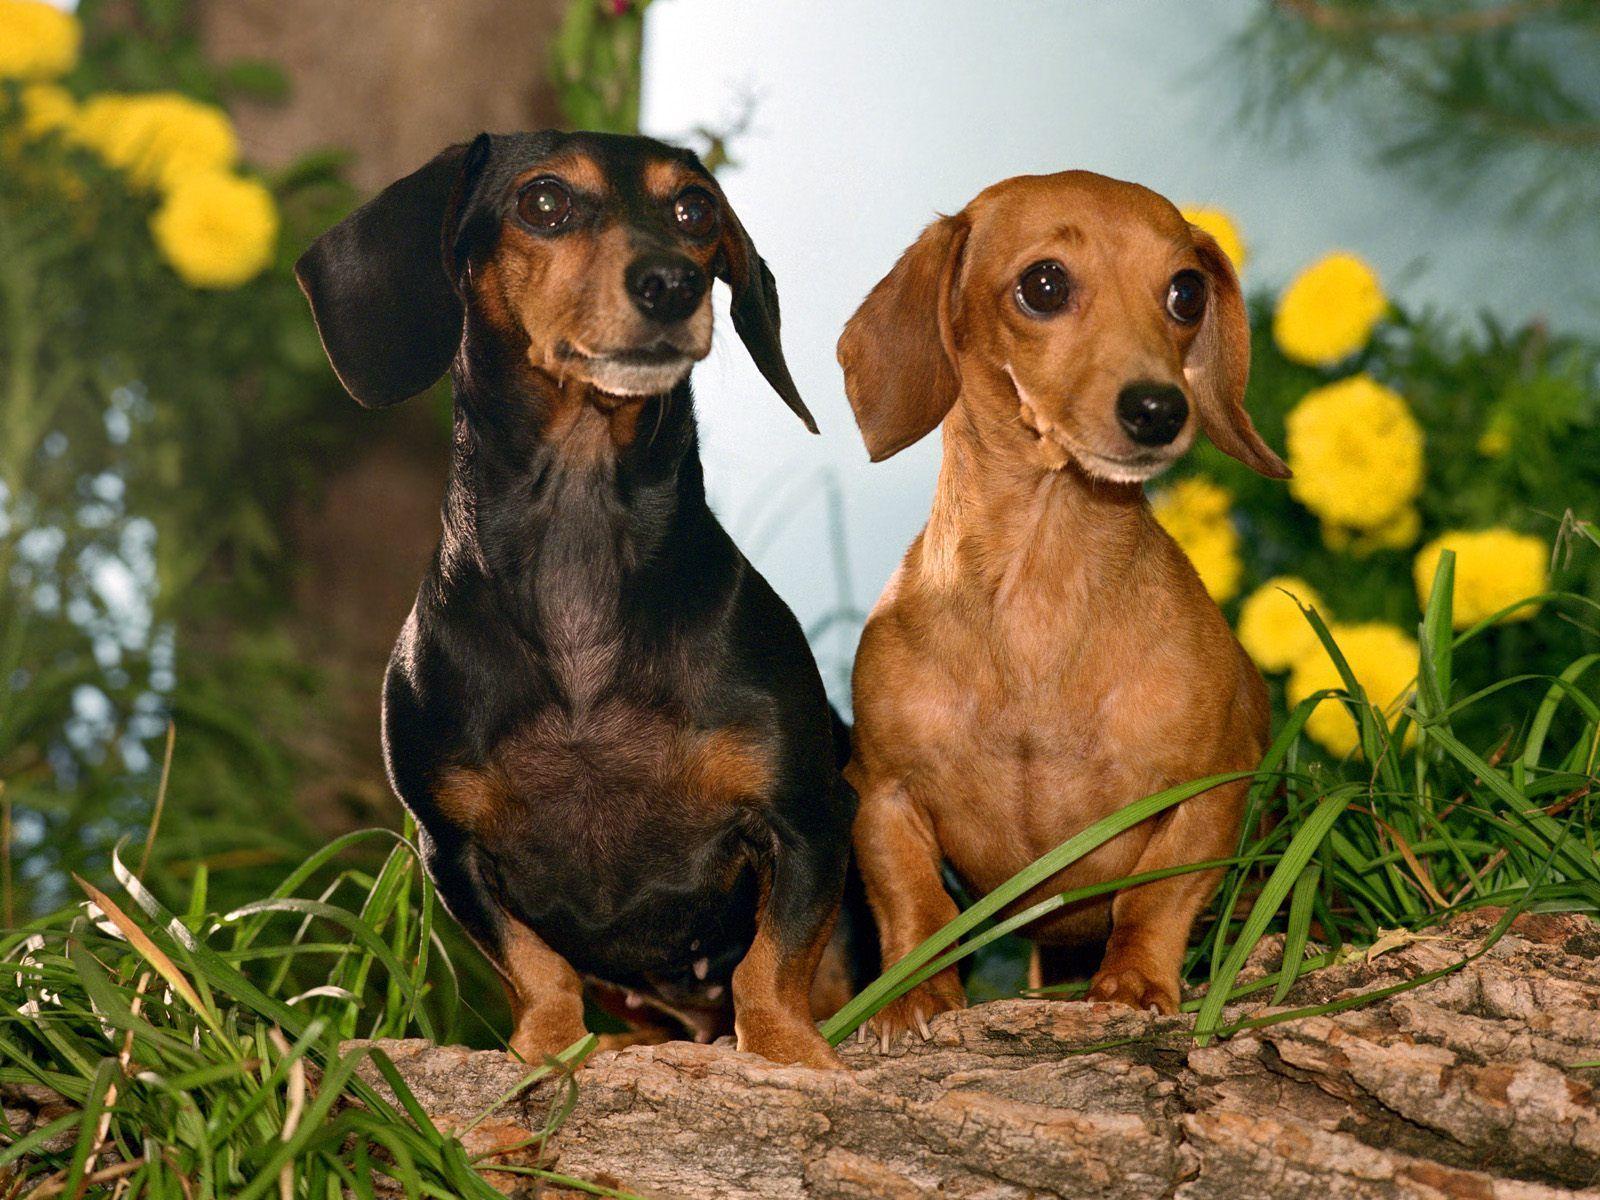 Cute Dachshund dogs in flowers photo and wallpaper. Beautiful Cute